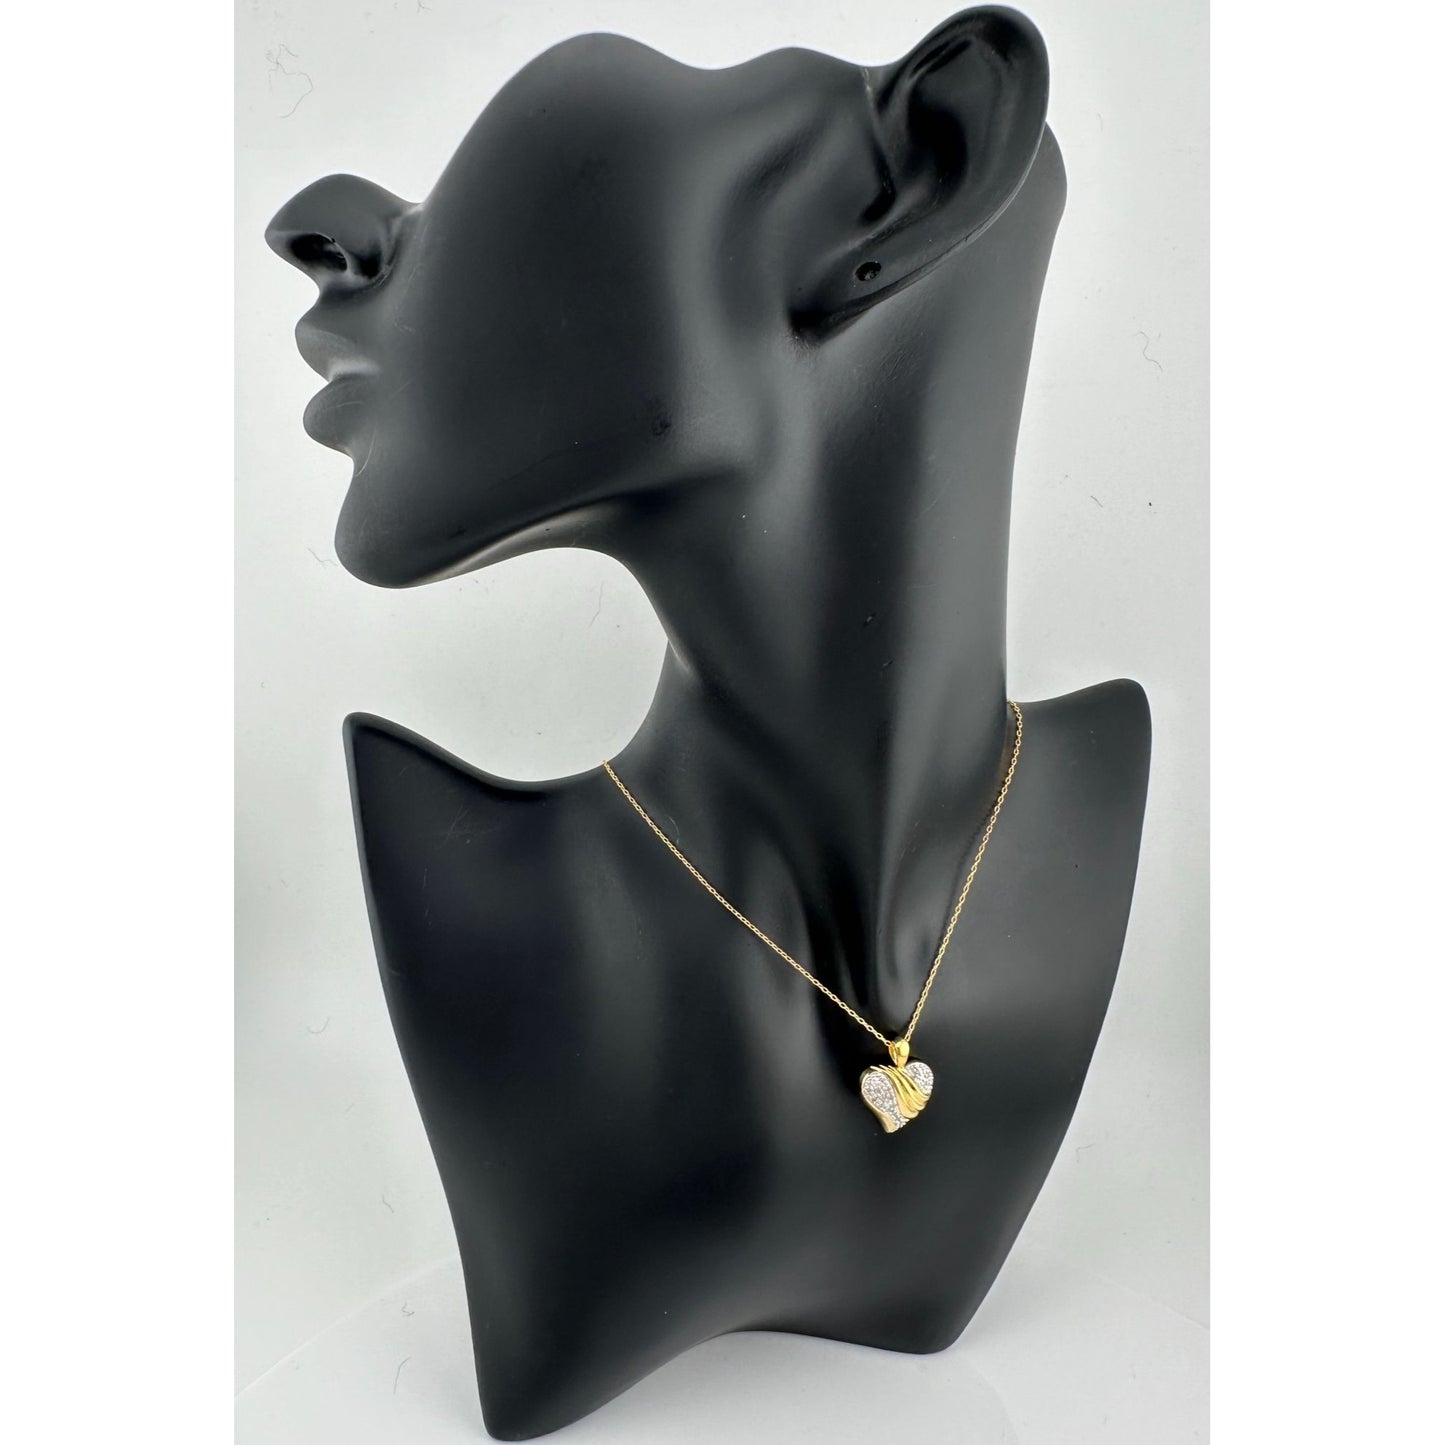 Shining Bright Natural Diamond Heart Necklace - 14kt Gold Overlay Silver